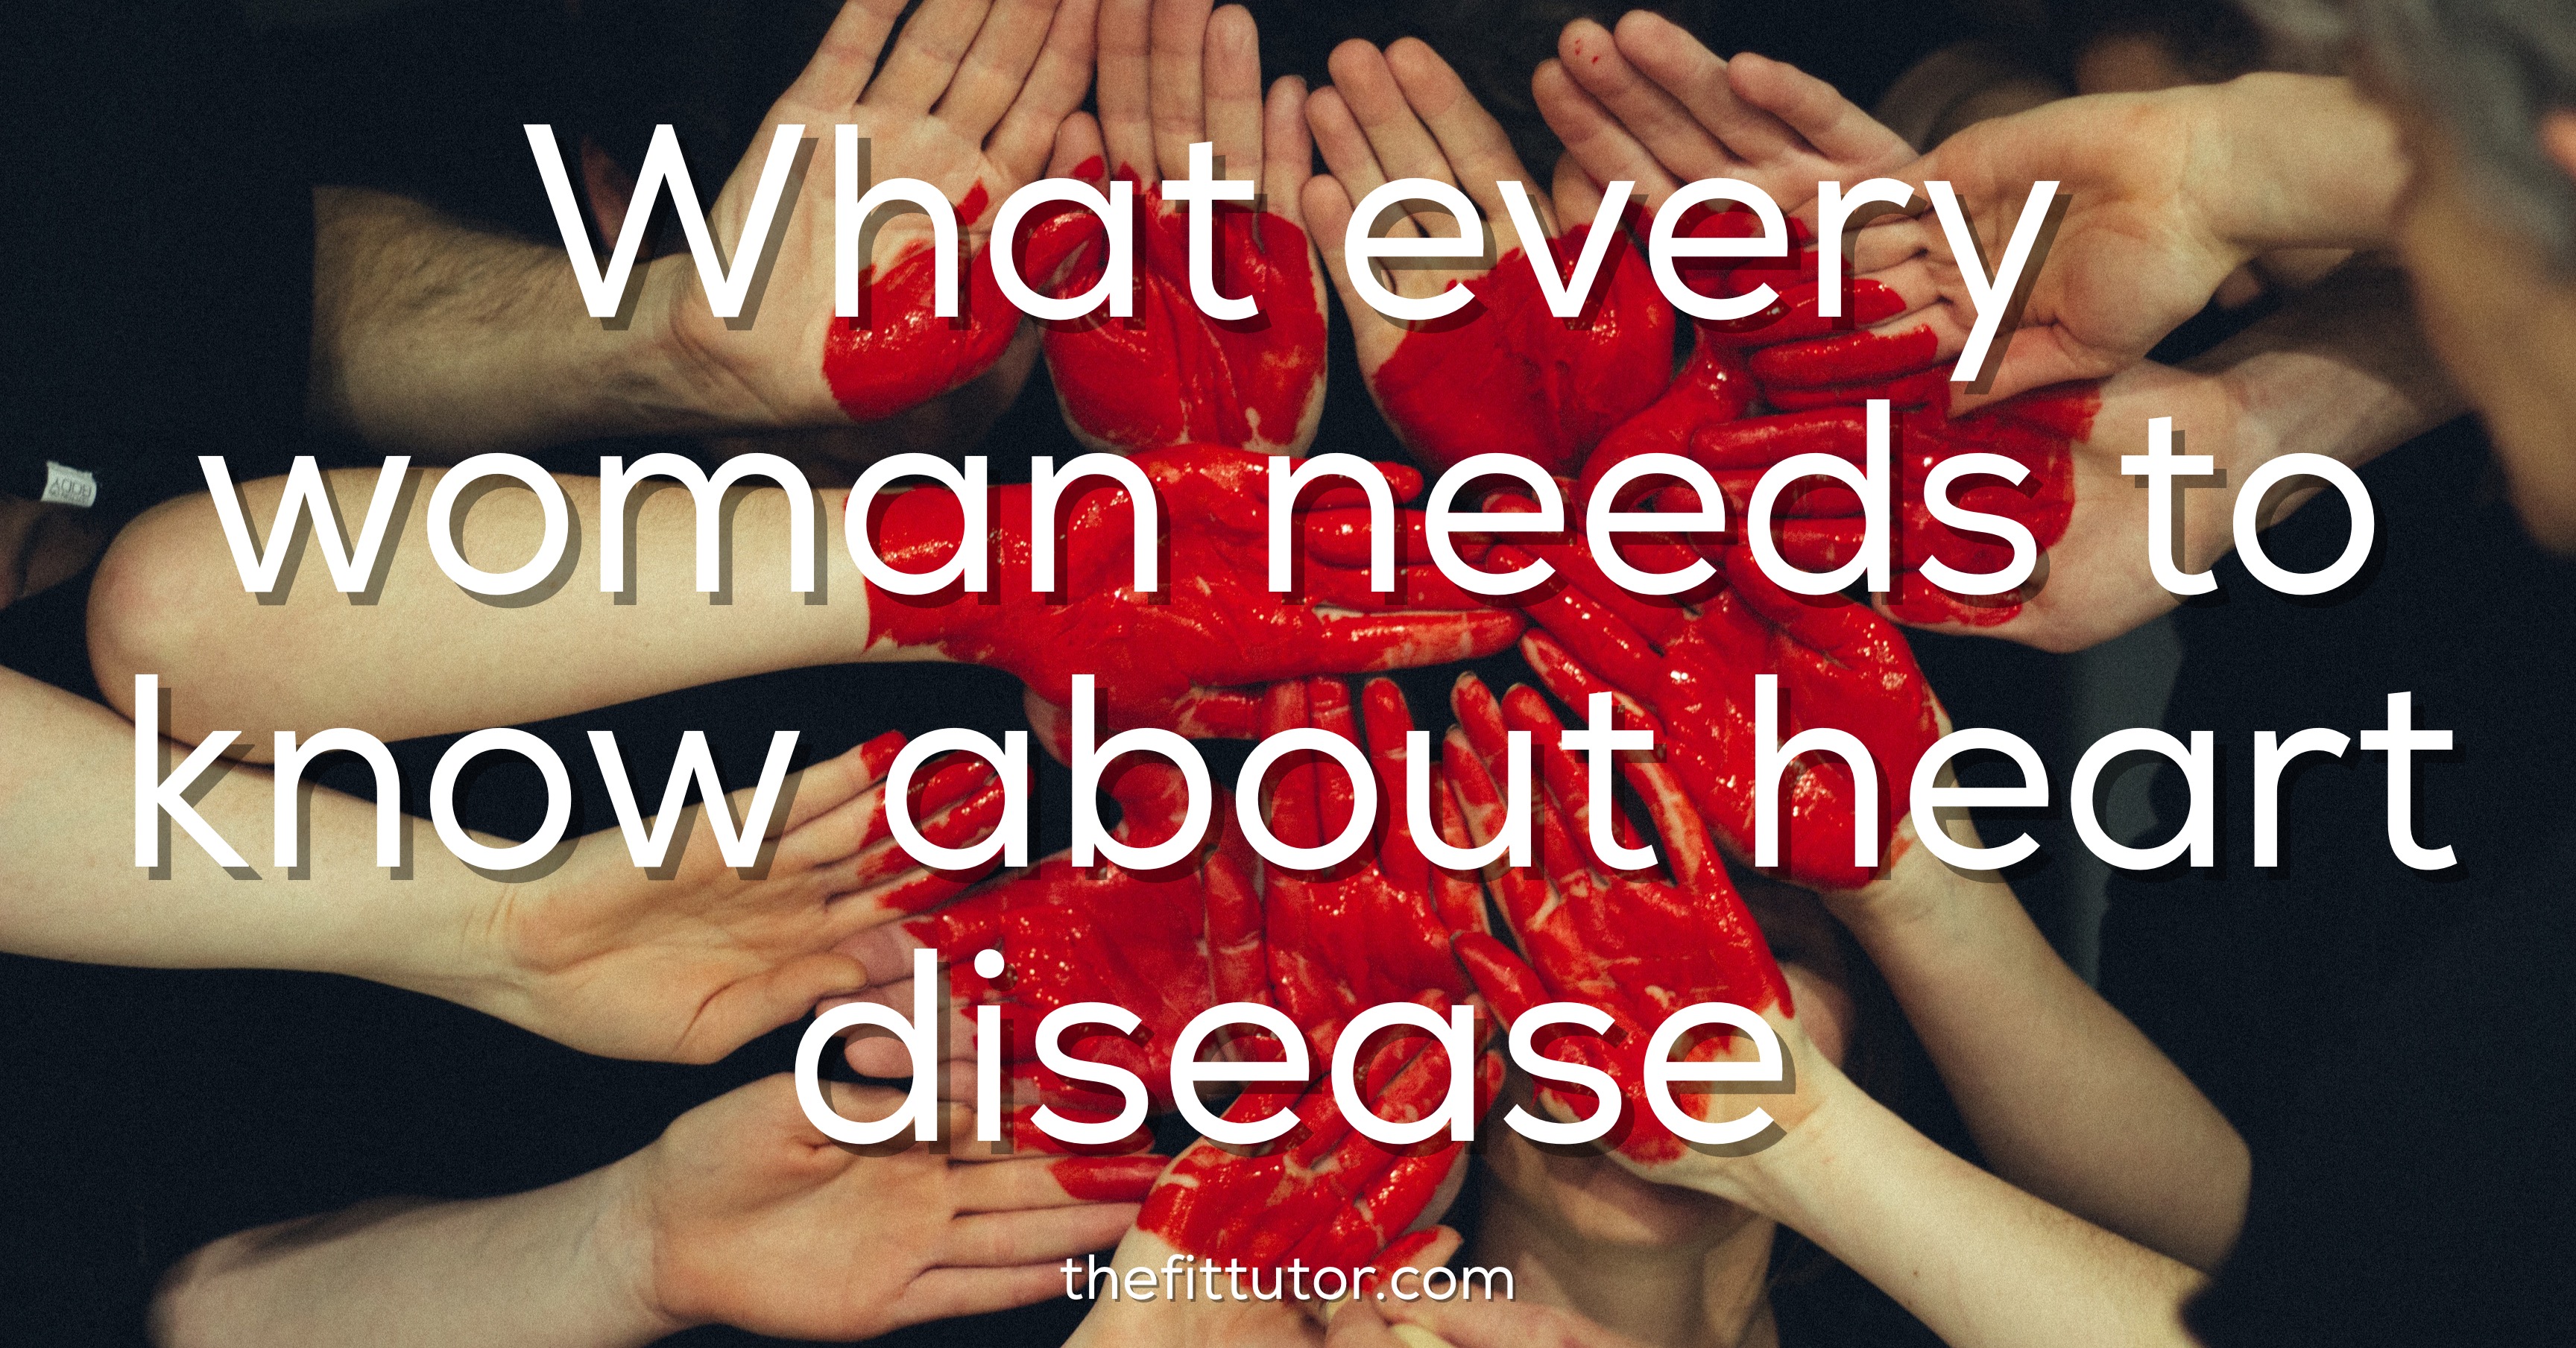 what every woman needs to know about heart disease- the #1 killer of women!